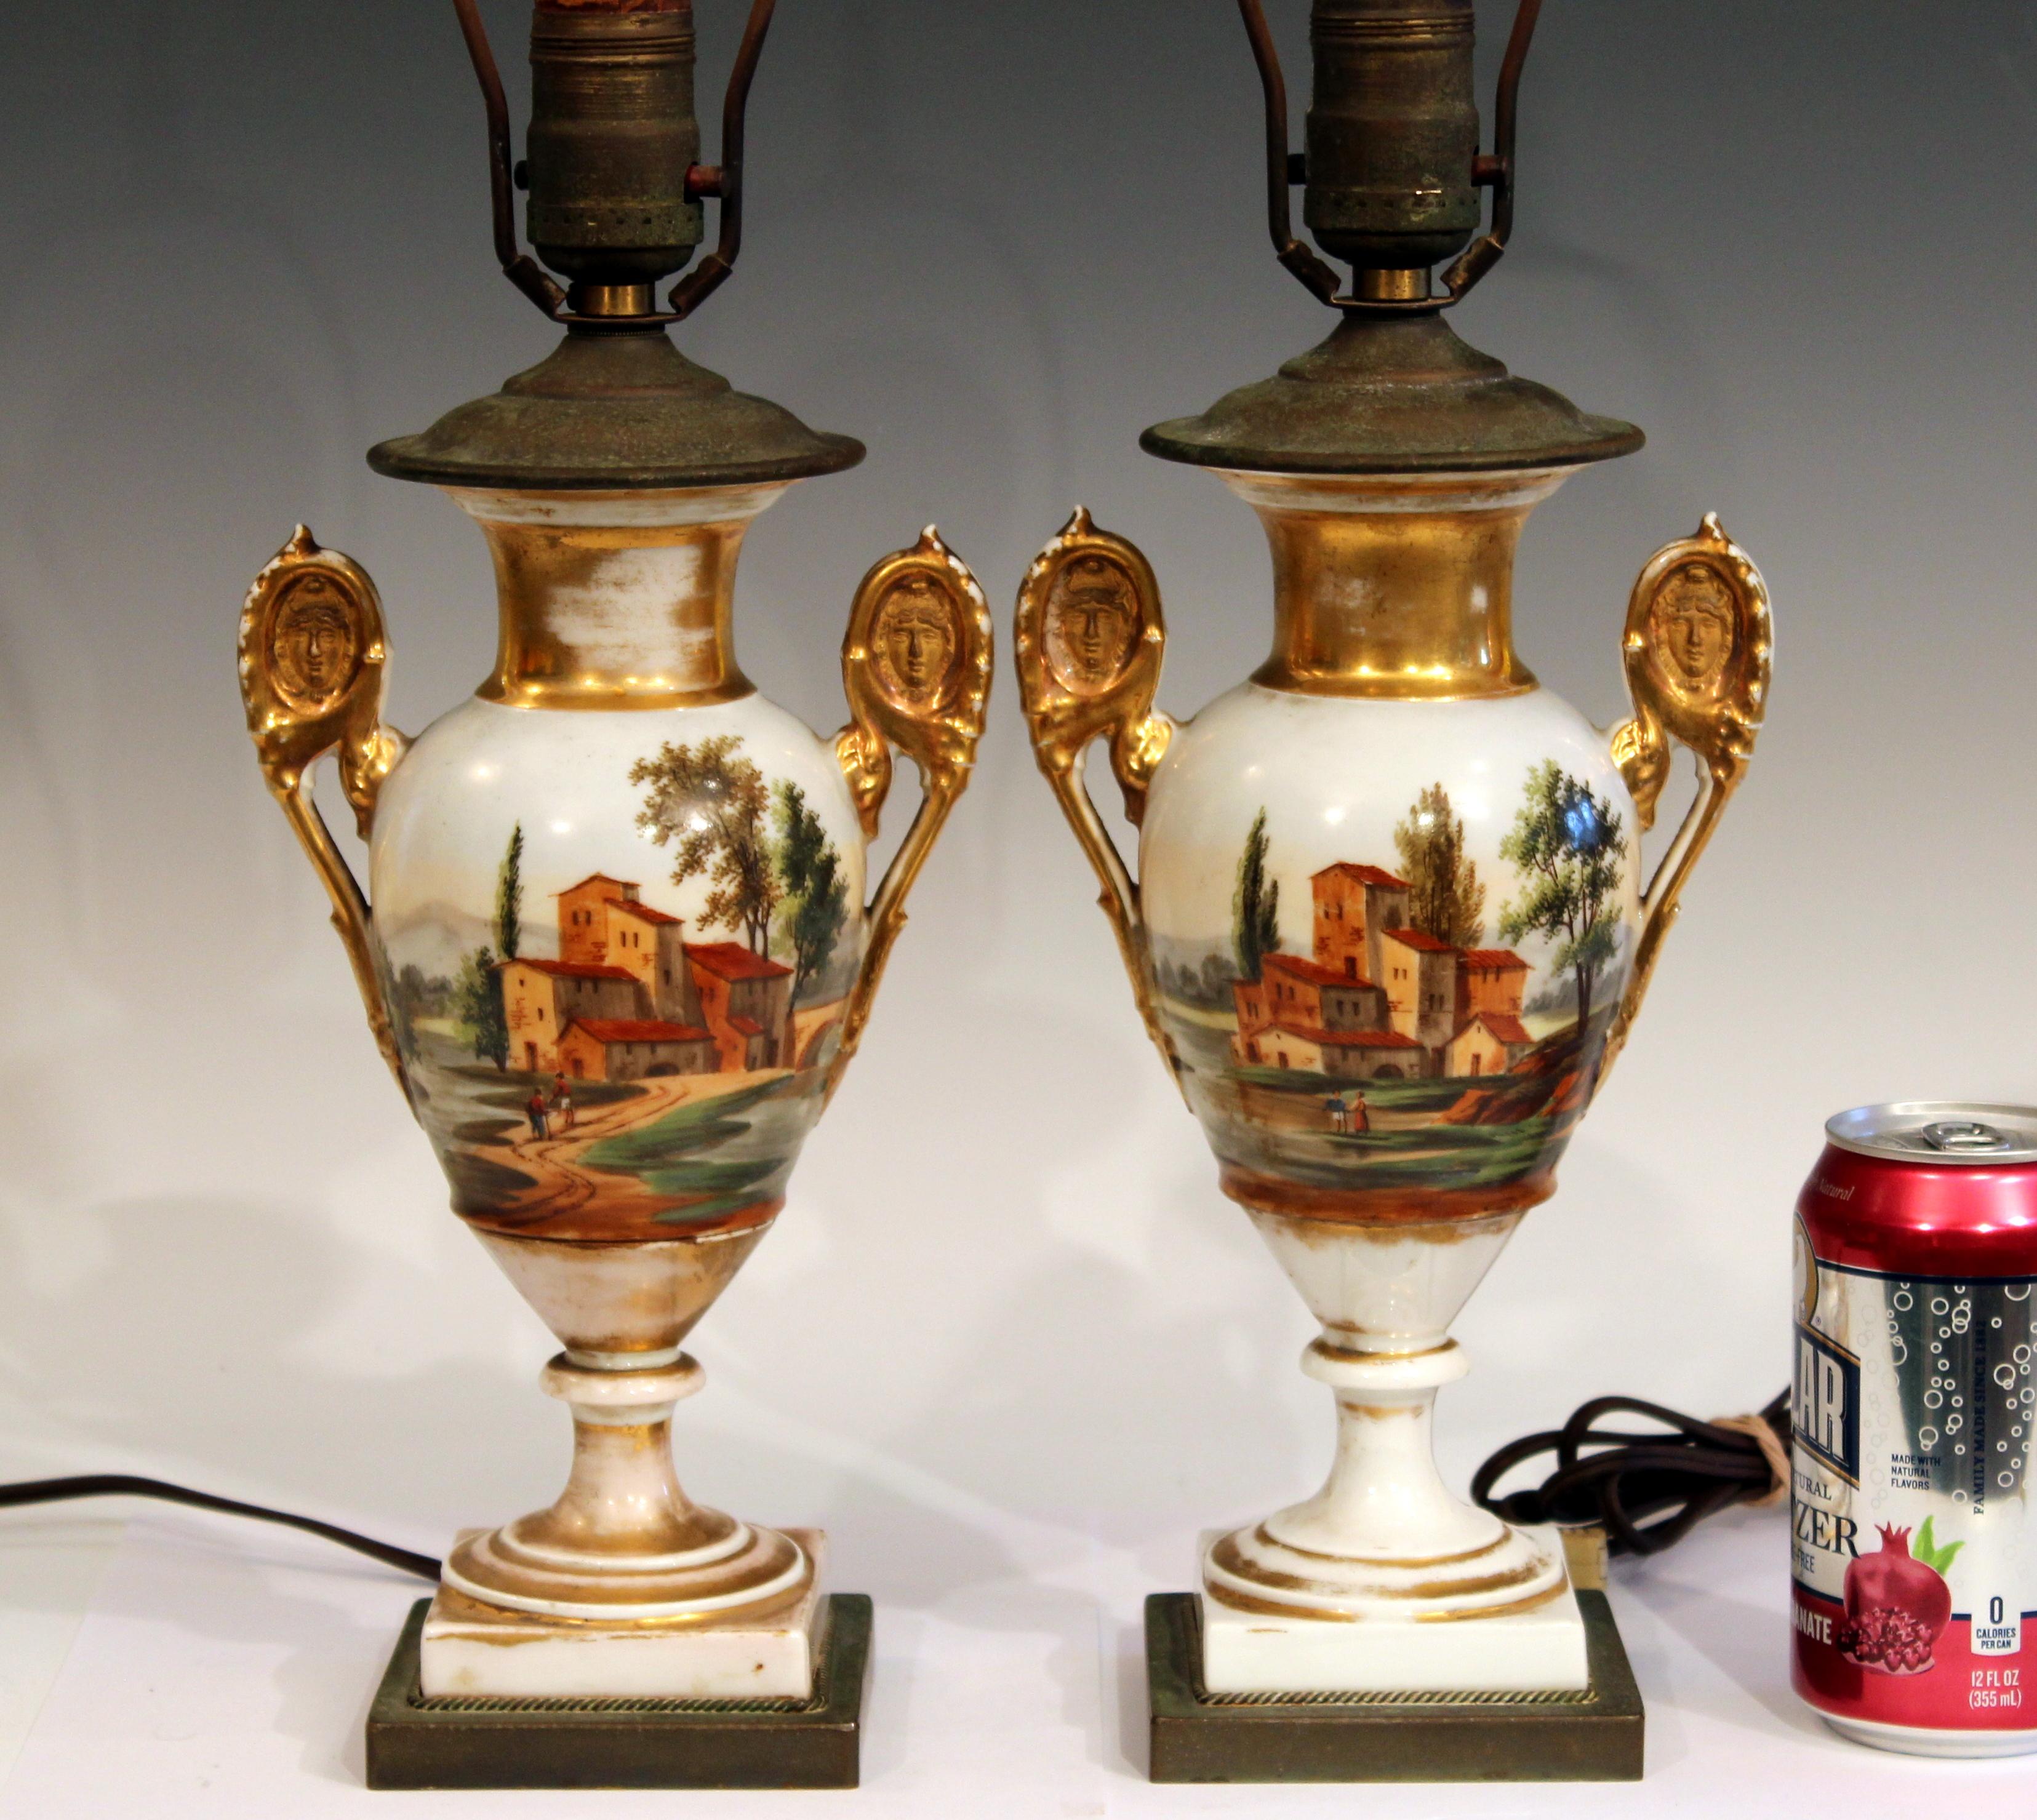 Pair antique Paris porcelain vases mounted as lamps with scenes of the French countryside, circa early mid-19th century. Four different hand painted scenes with beautiful two-tone gilding and face details on handles. 20